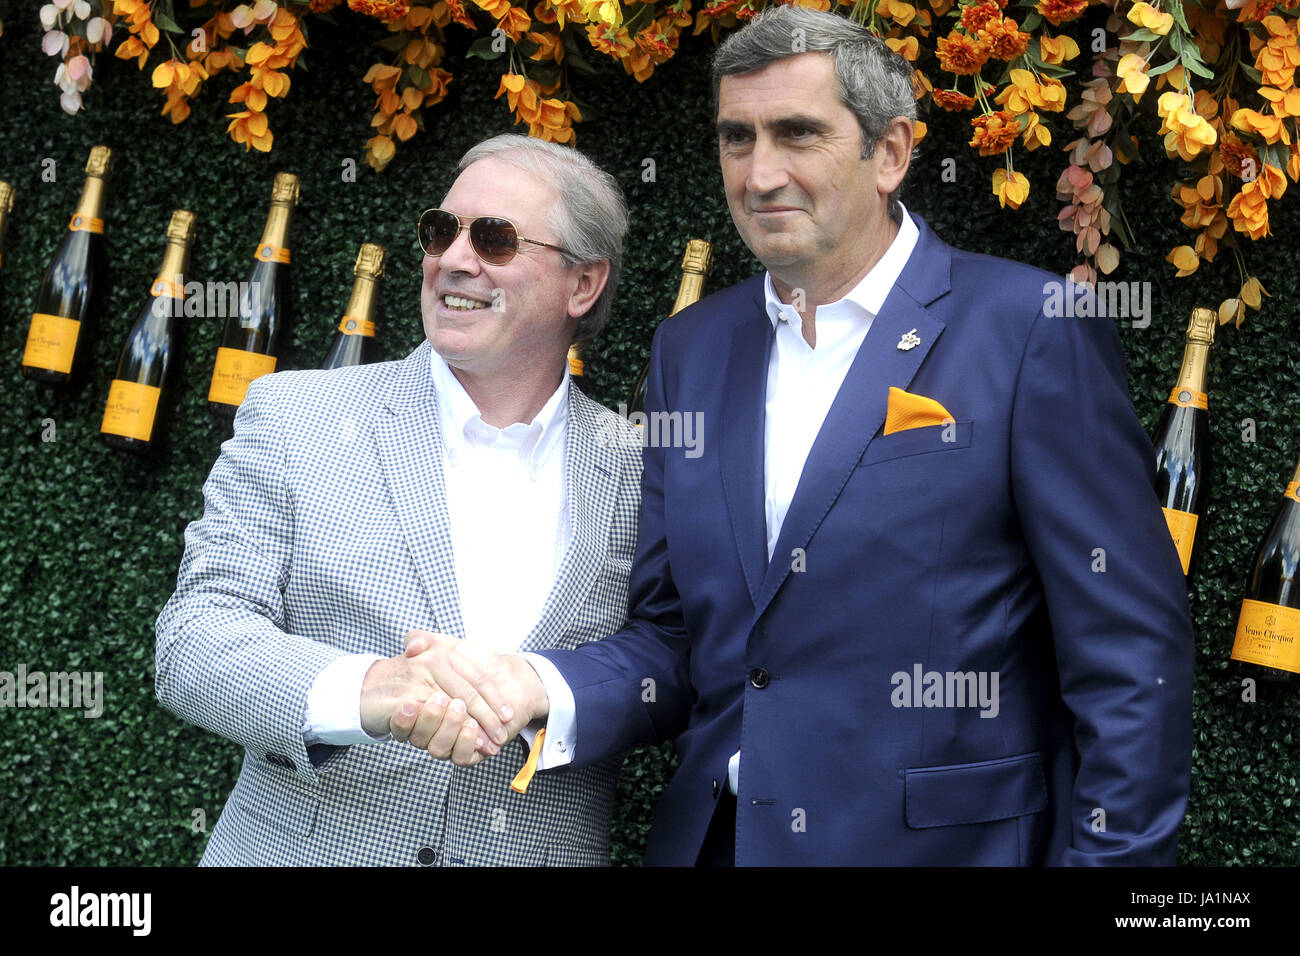 Jean-Marc Gallot mit Gast at the Veuve Clicquot Polo Classic in